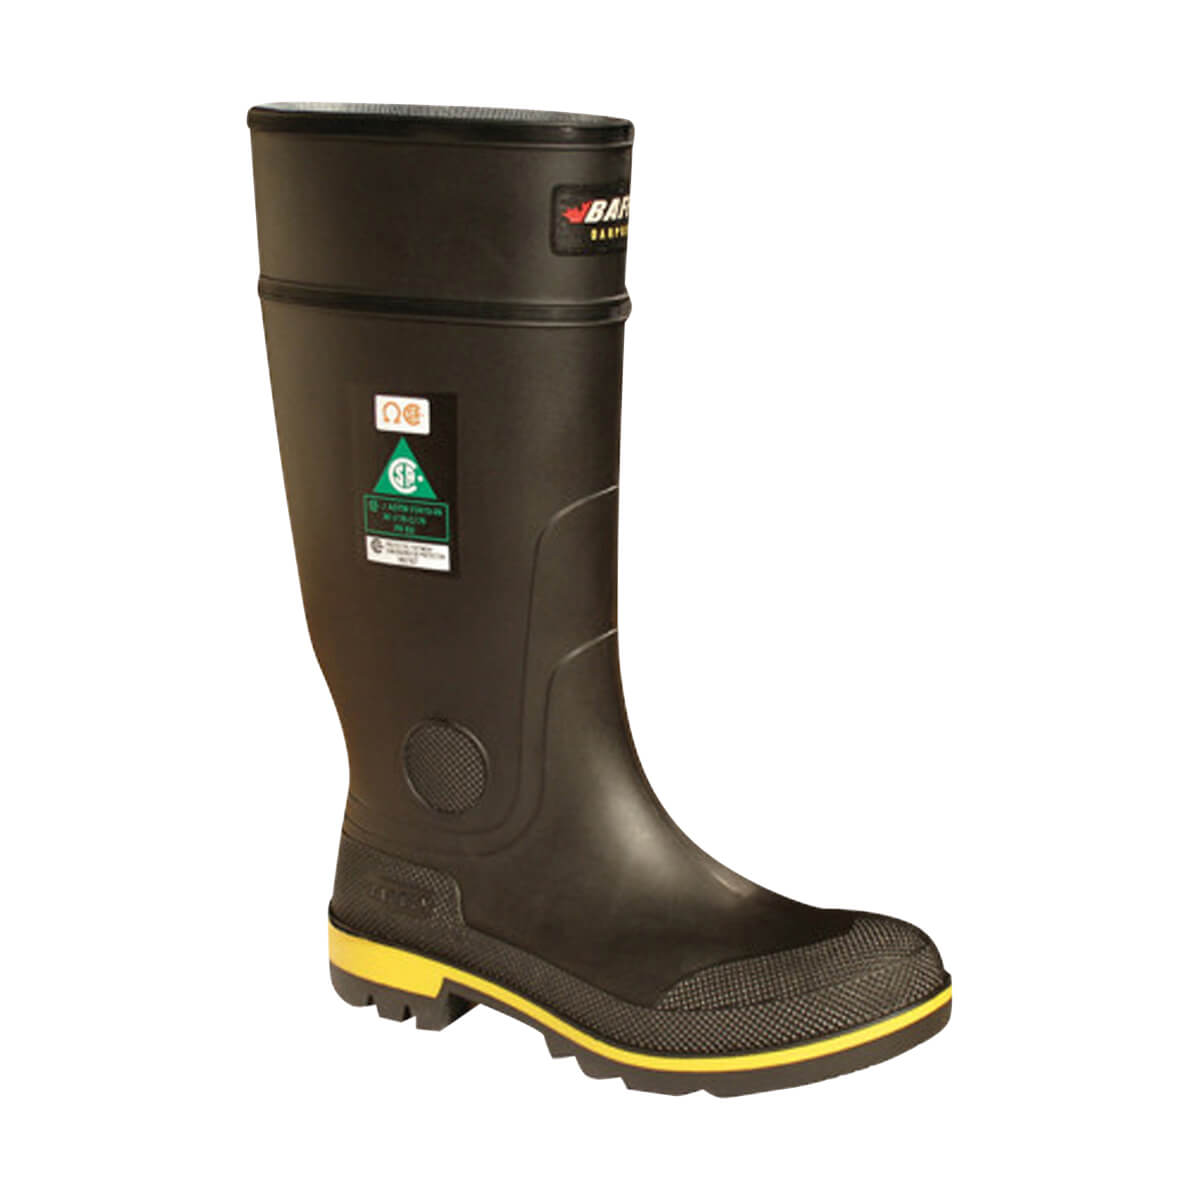 Men's Baffin Maximum Unlined Safety Boot - Black/Yellow